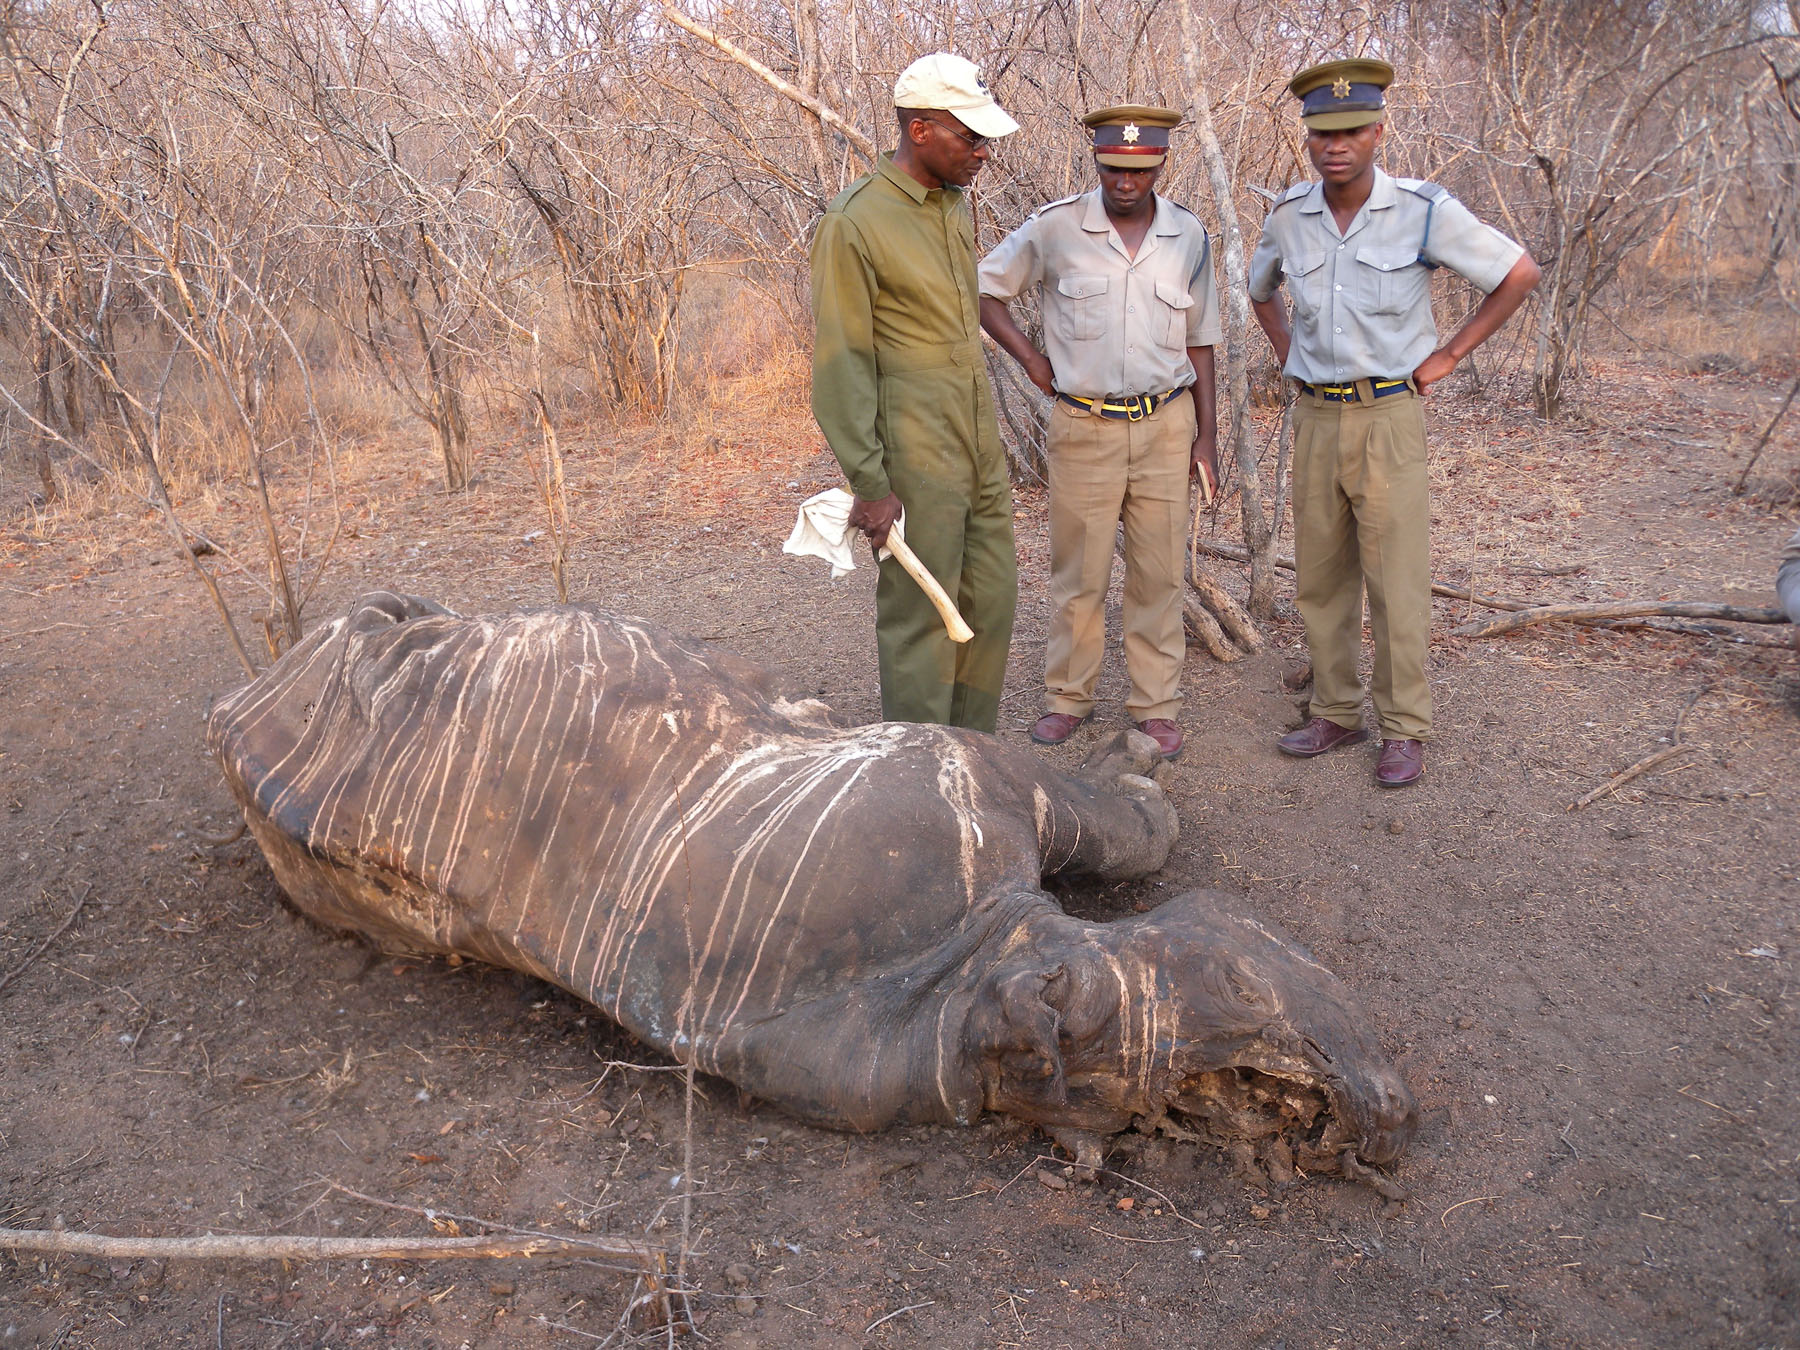 Operation: Stop Poaching Now – Law Enforcement Crackdown